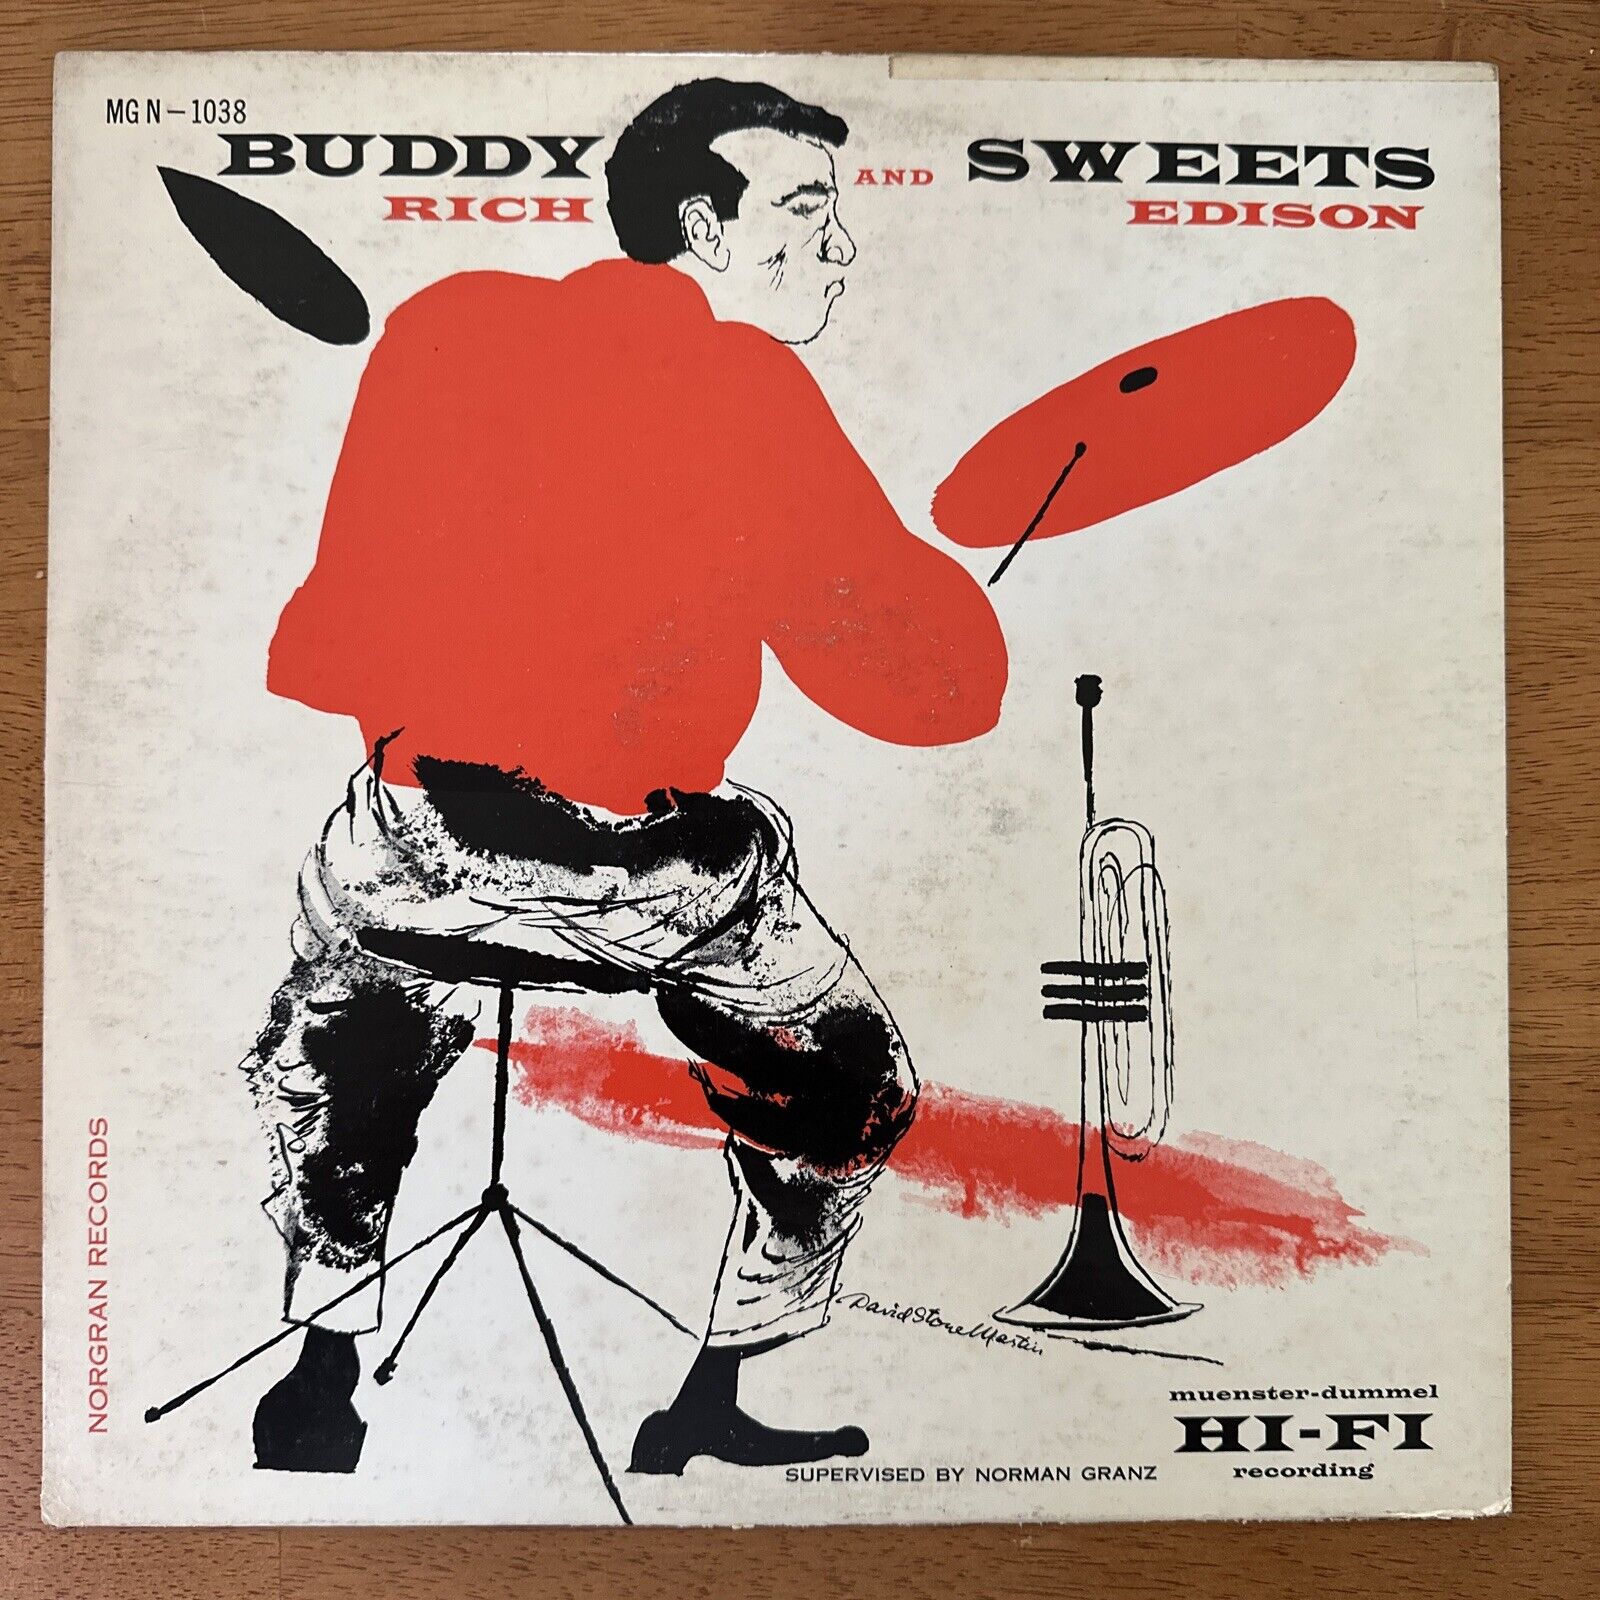 Buddy Rich, Harry Edison - Buddy And Sweets MG N-1038 1955 Lp 1st Press (NM)